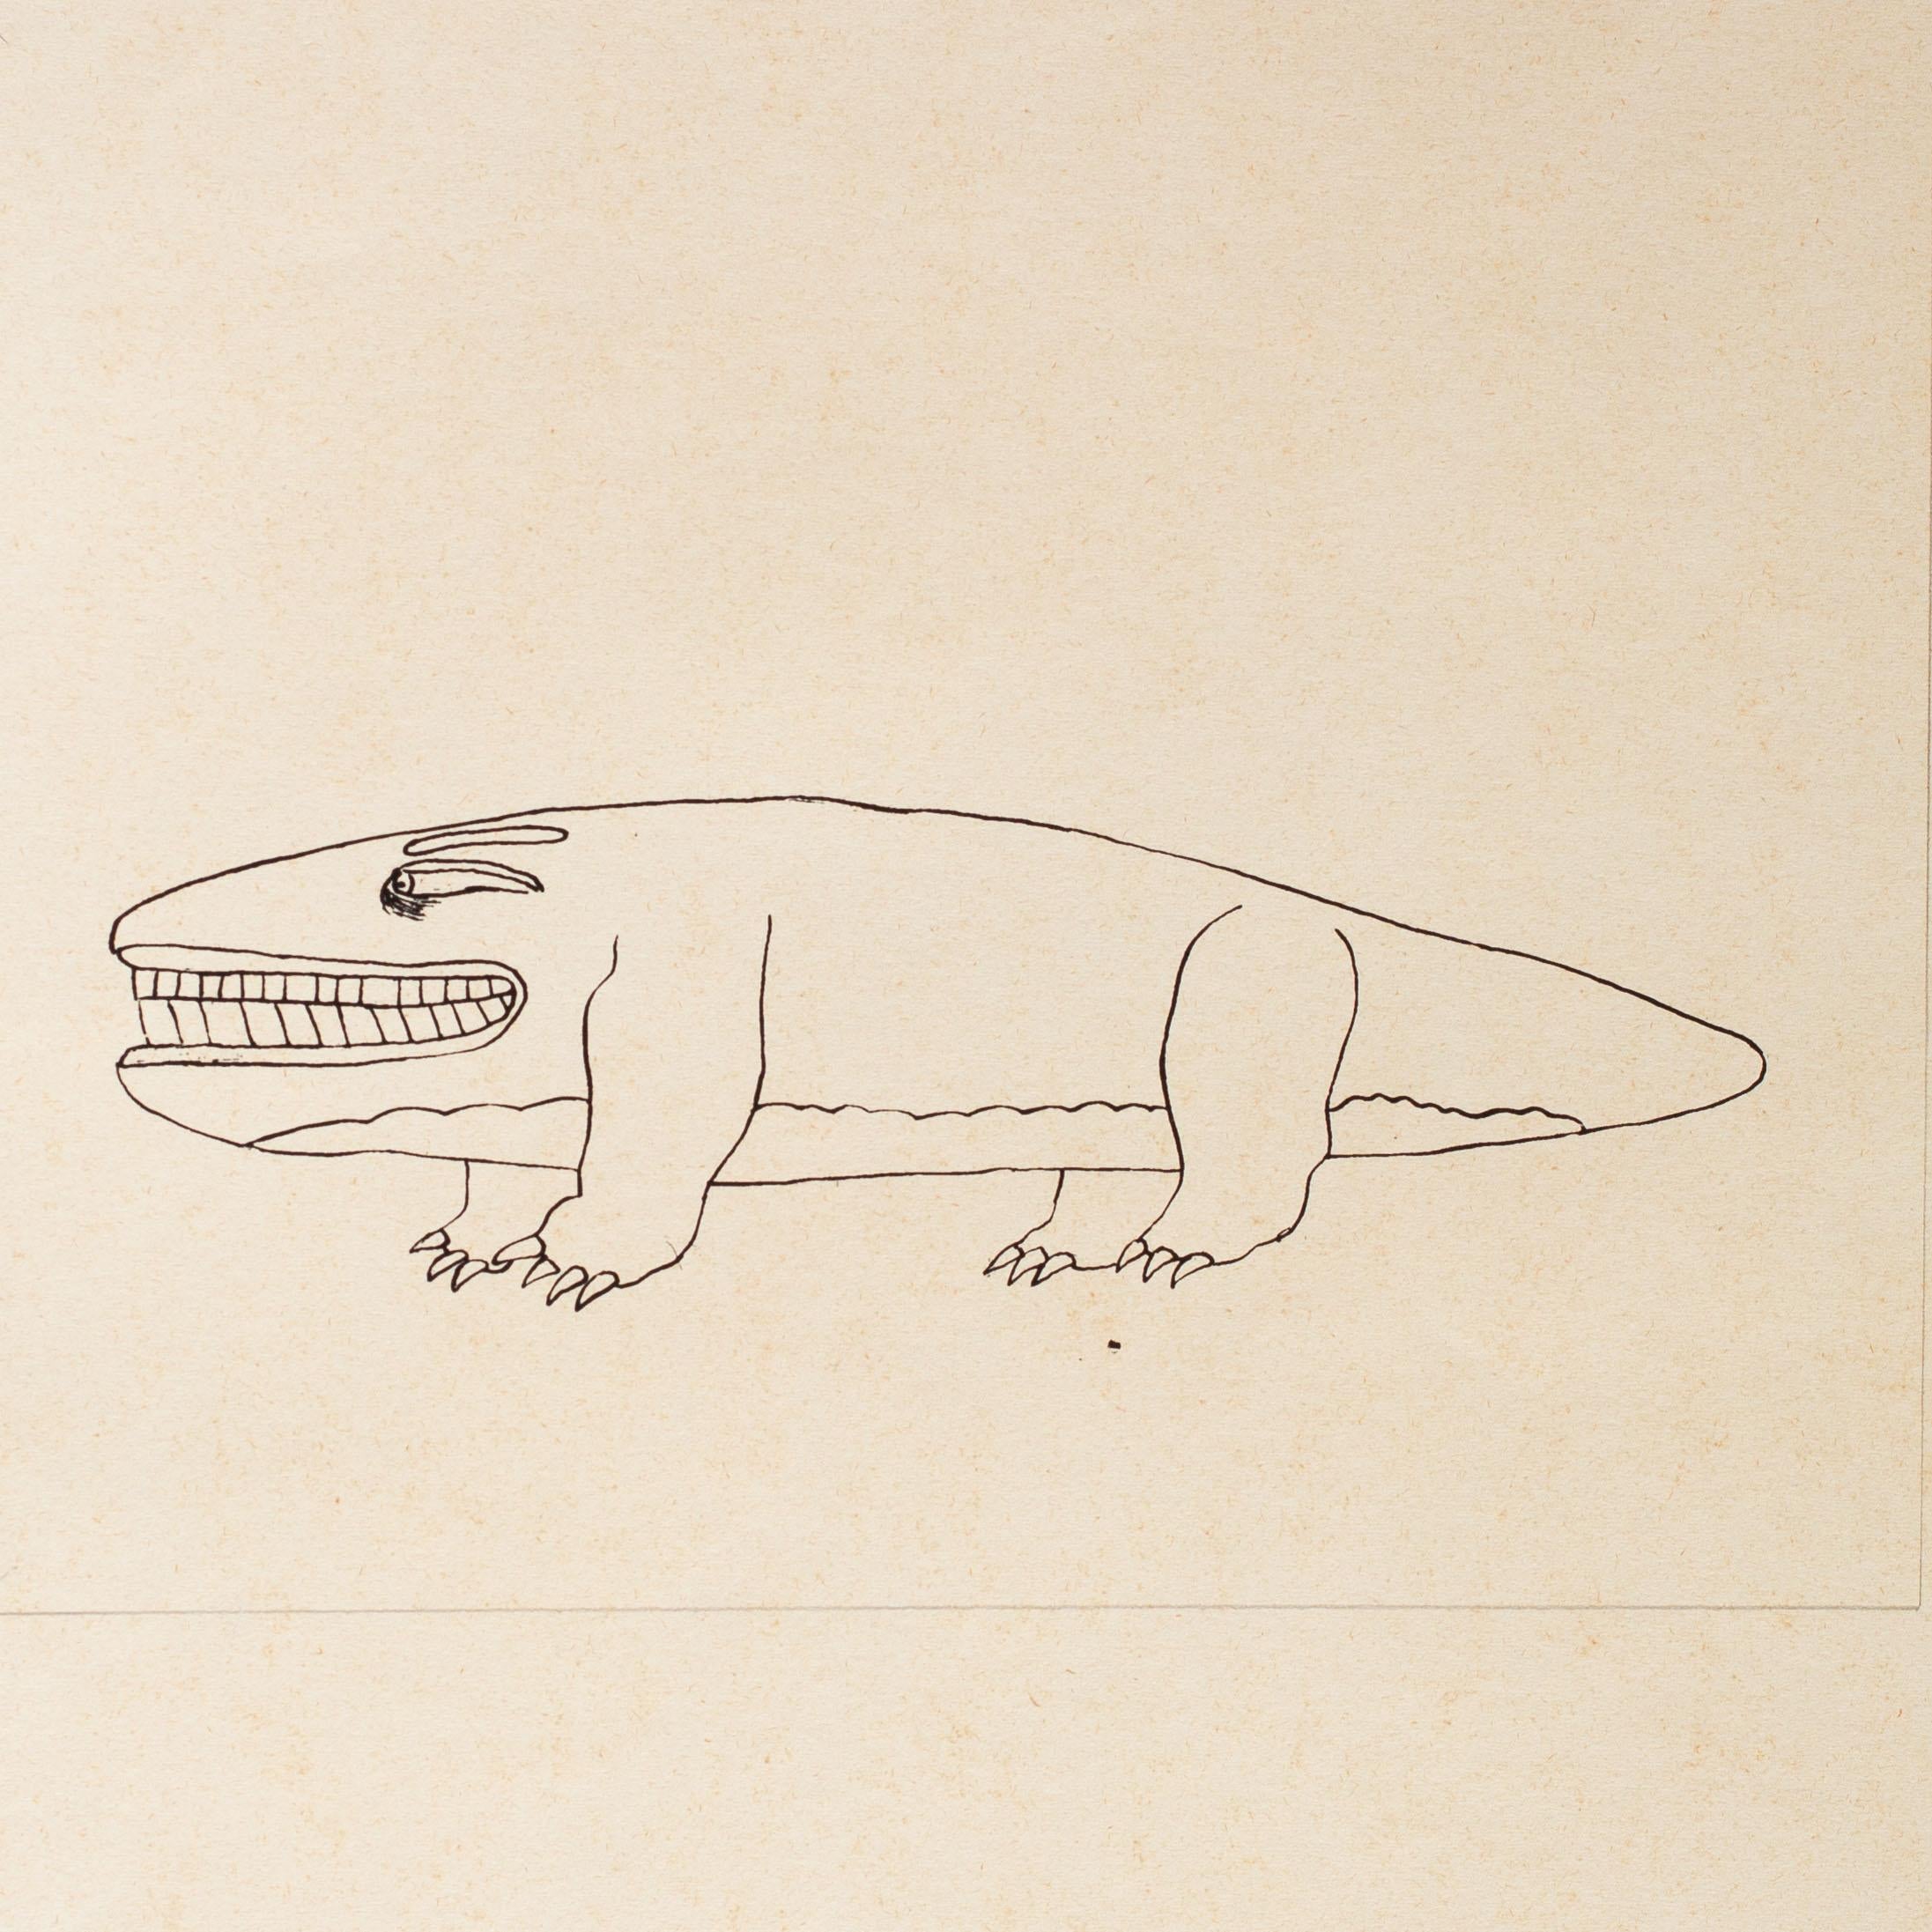 Heinz Edelmann (German, 1934 – 2009)
A smiling lizard beast
Pen on paper
Numbered ‘4’ (lower right under the mount)
8.1/2 x 10.1/8 in. (21.5 x 25.8 cm.) (to site edge)
Provenance: formerly in the possession of Rudiger Volhard, Clifford Chance